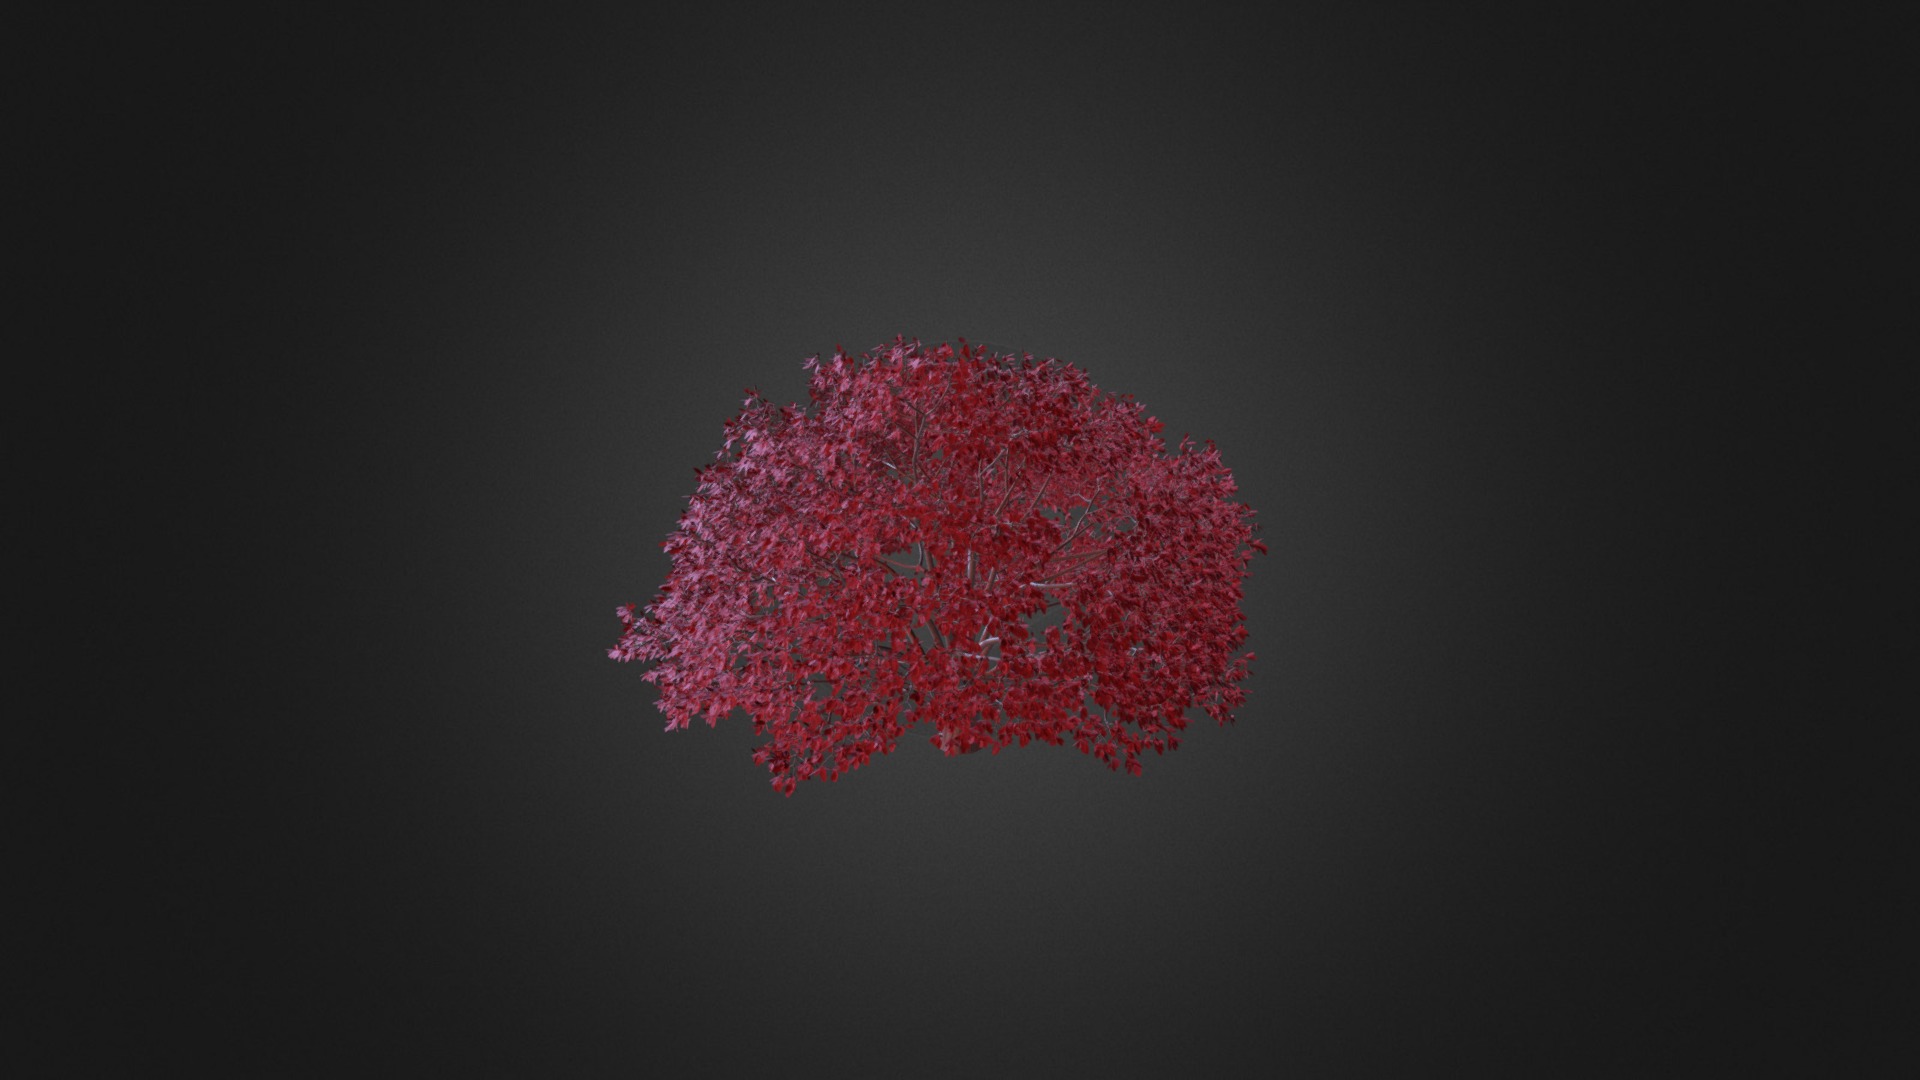 3D model Persian Ironwood Tree 11 - This is a 3D model of the Persian Ironwood Tree 11. The 3D model is about a red heart with a black background.